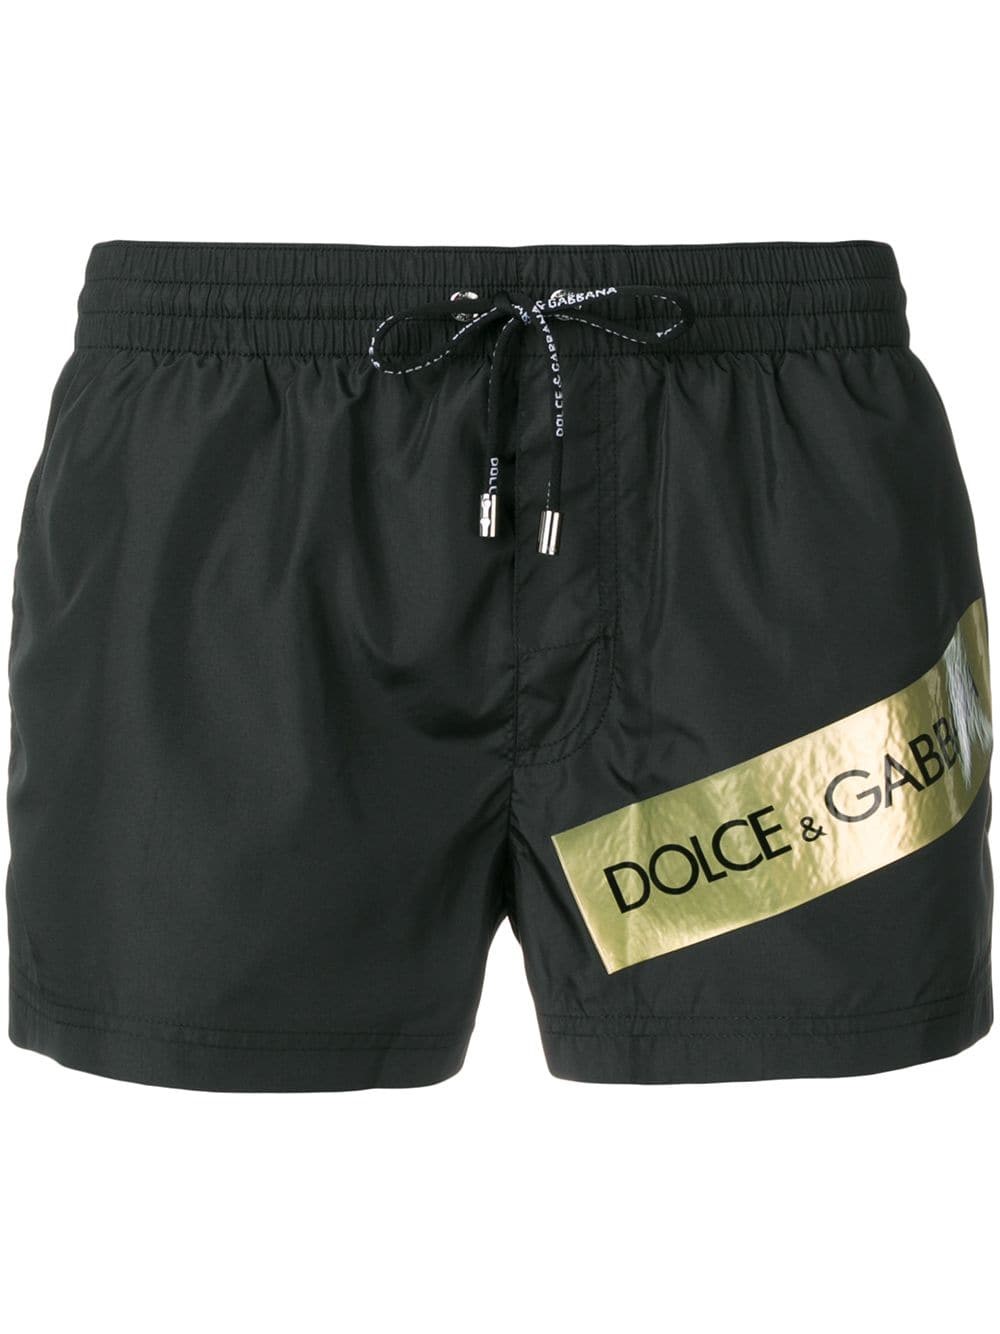 dolce & gabbana SWIMWEAR available on montiboutique.com - 27173